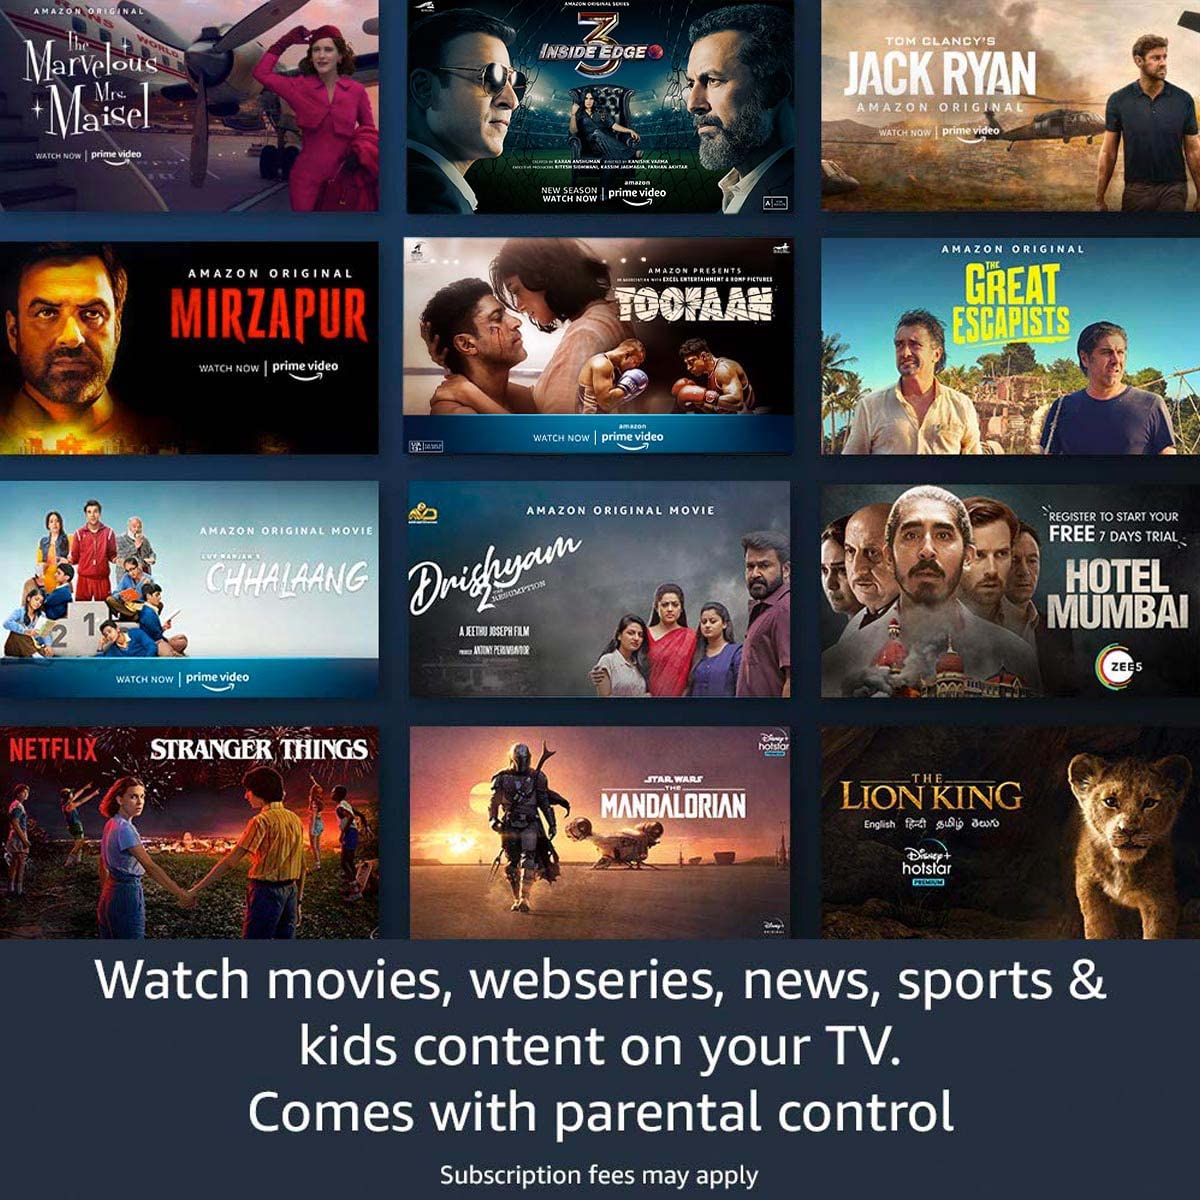 Fire TV Stick with Alexa Voice Remote (includes TV and app controls)